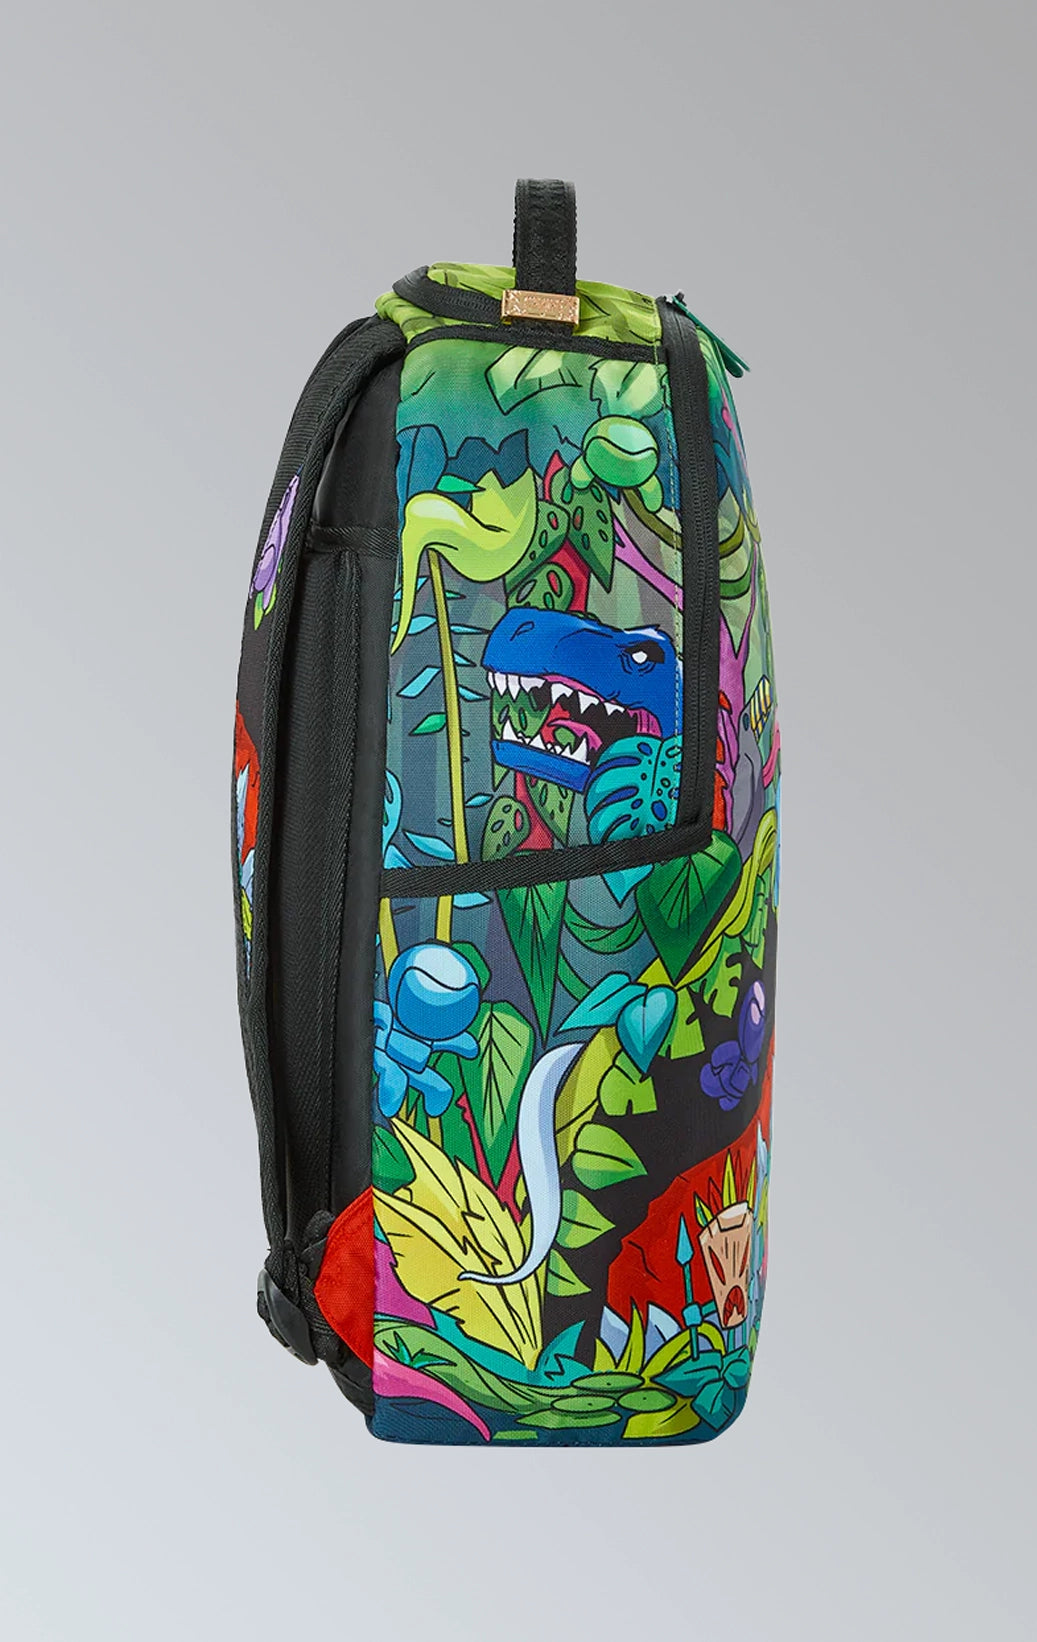 vibrant and stylish Sprayground backpack features a unique space-themed design with stars, planets, and other celestial objects.